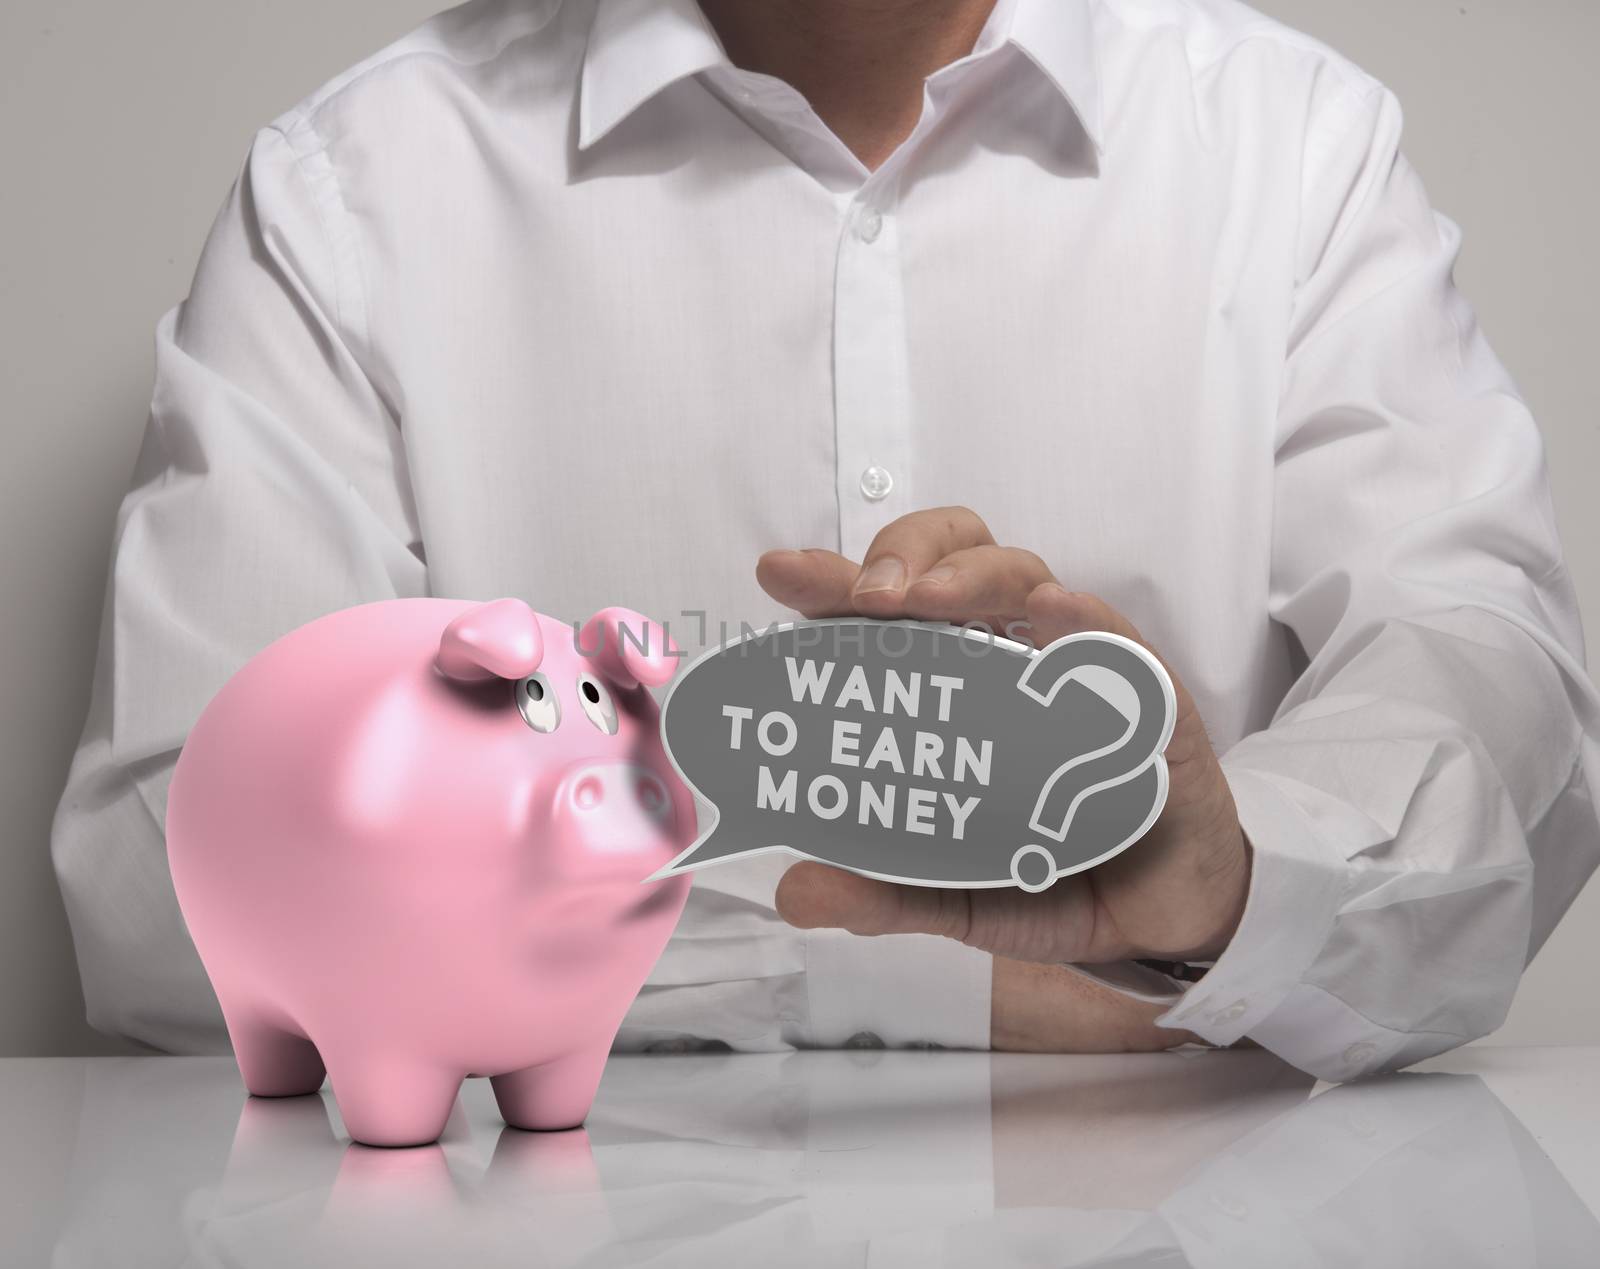 Image of a man hand holding speech balloon with the text want to earn money and pink piggy bank, white shirt. Concept for money earning.